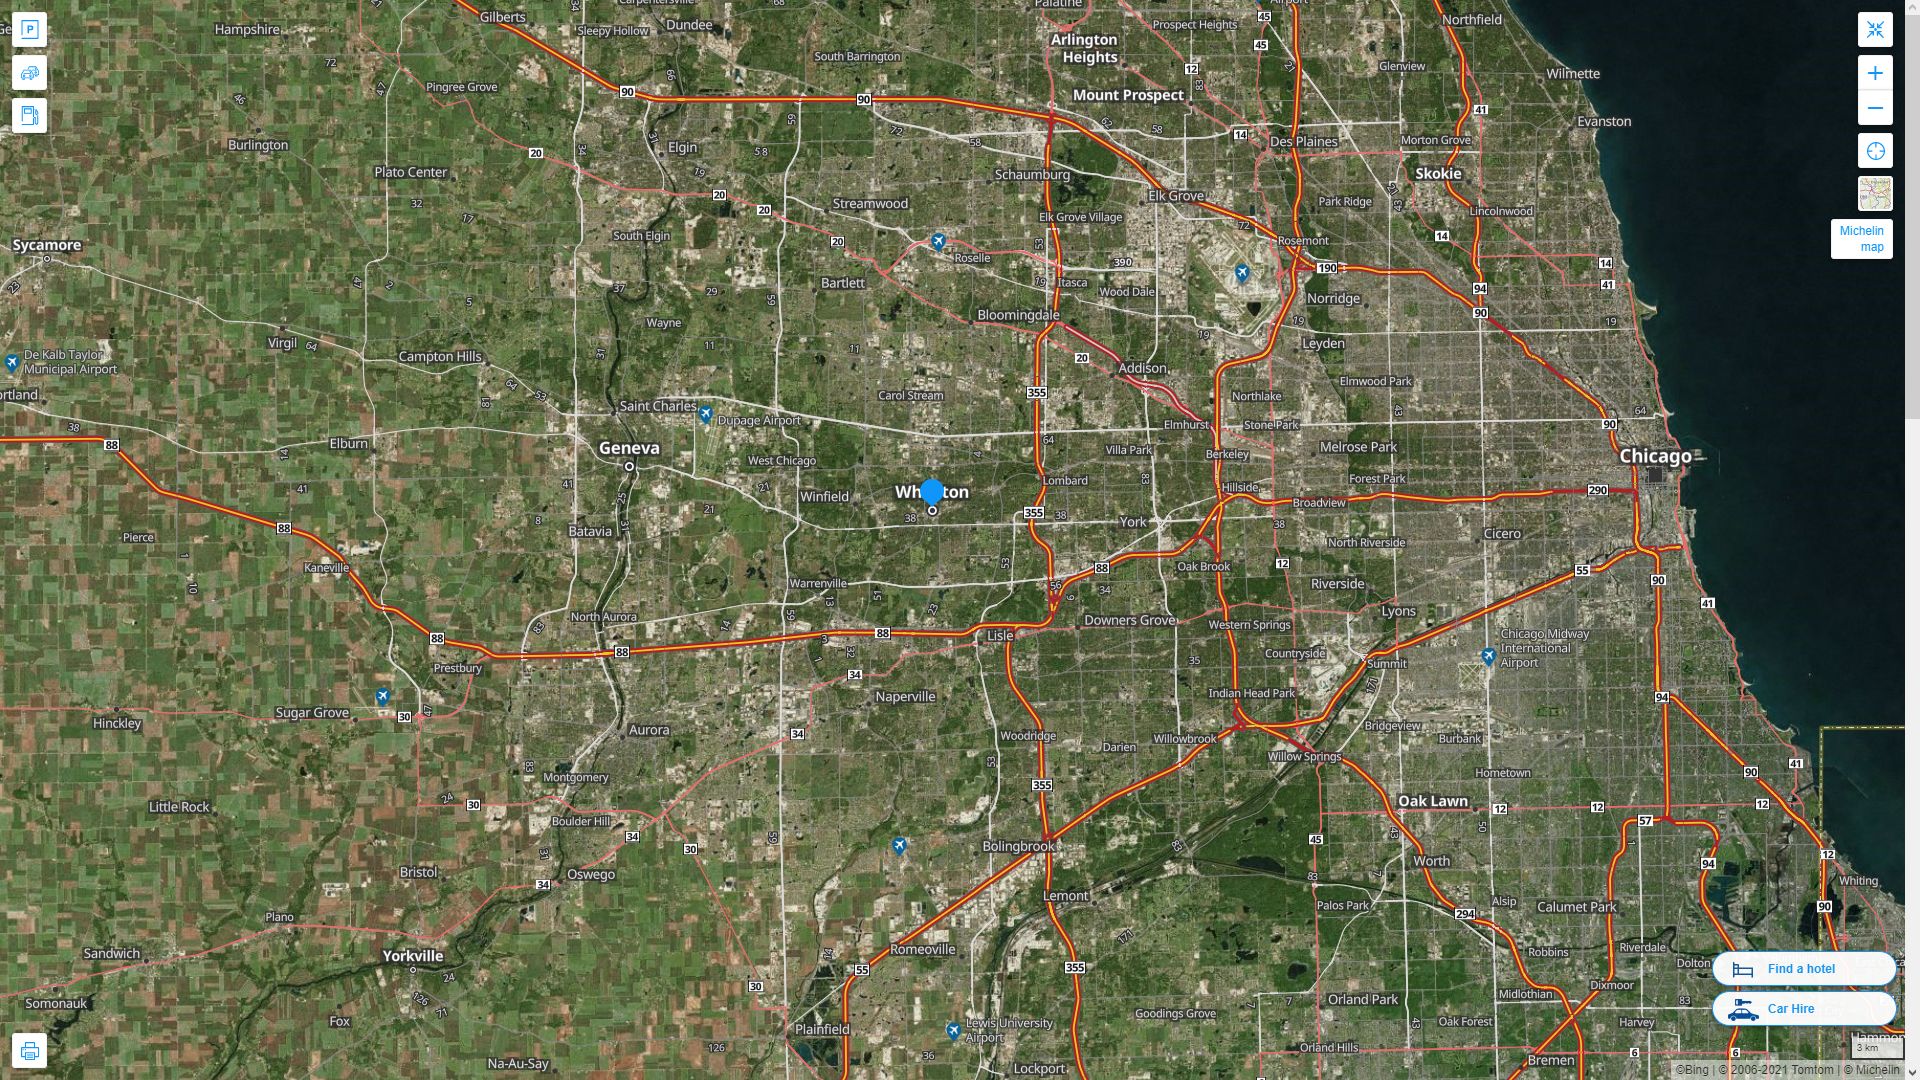 Wheaton illinois Highway and Road Map with Satellite View